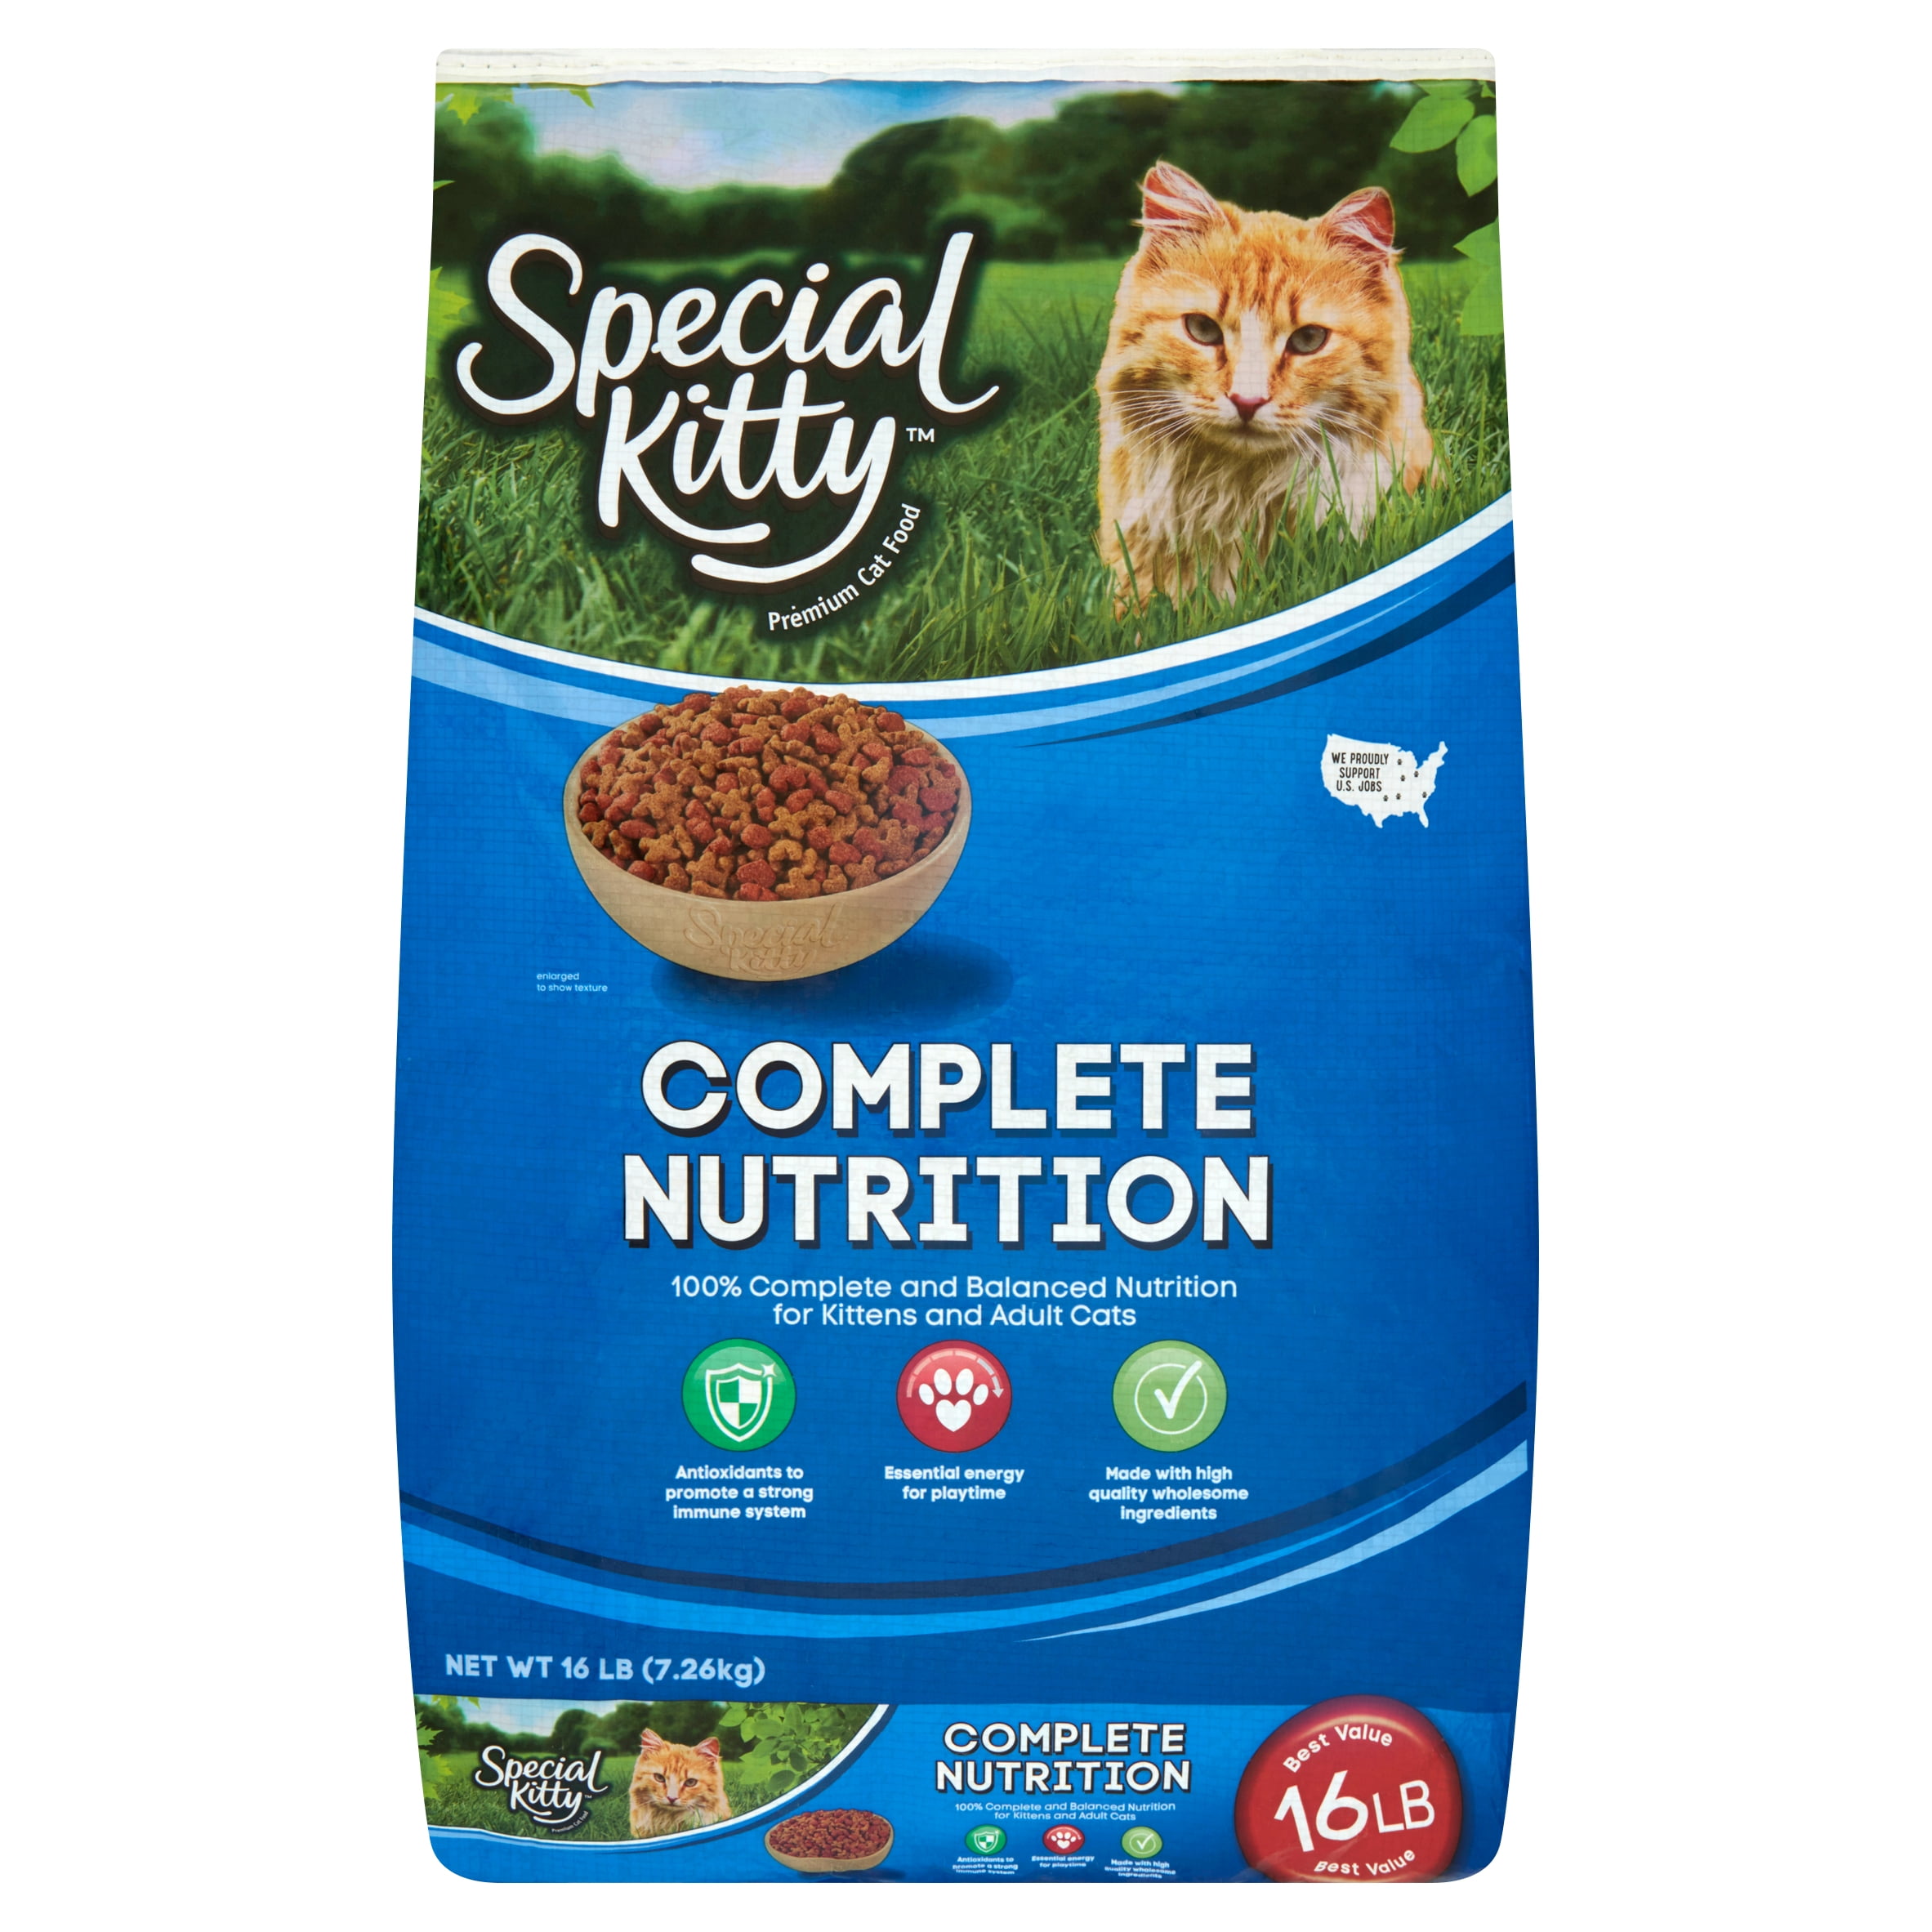 Special Kitty Complete Nutrition Premium Cat Food, 16 lb 